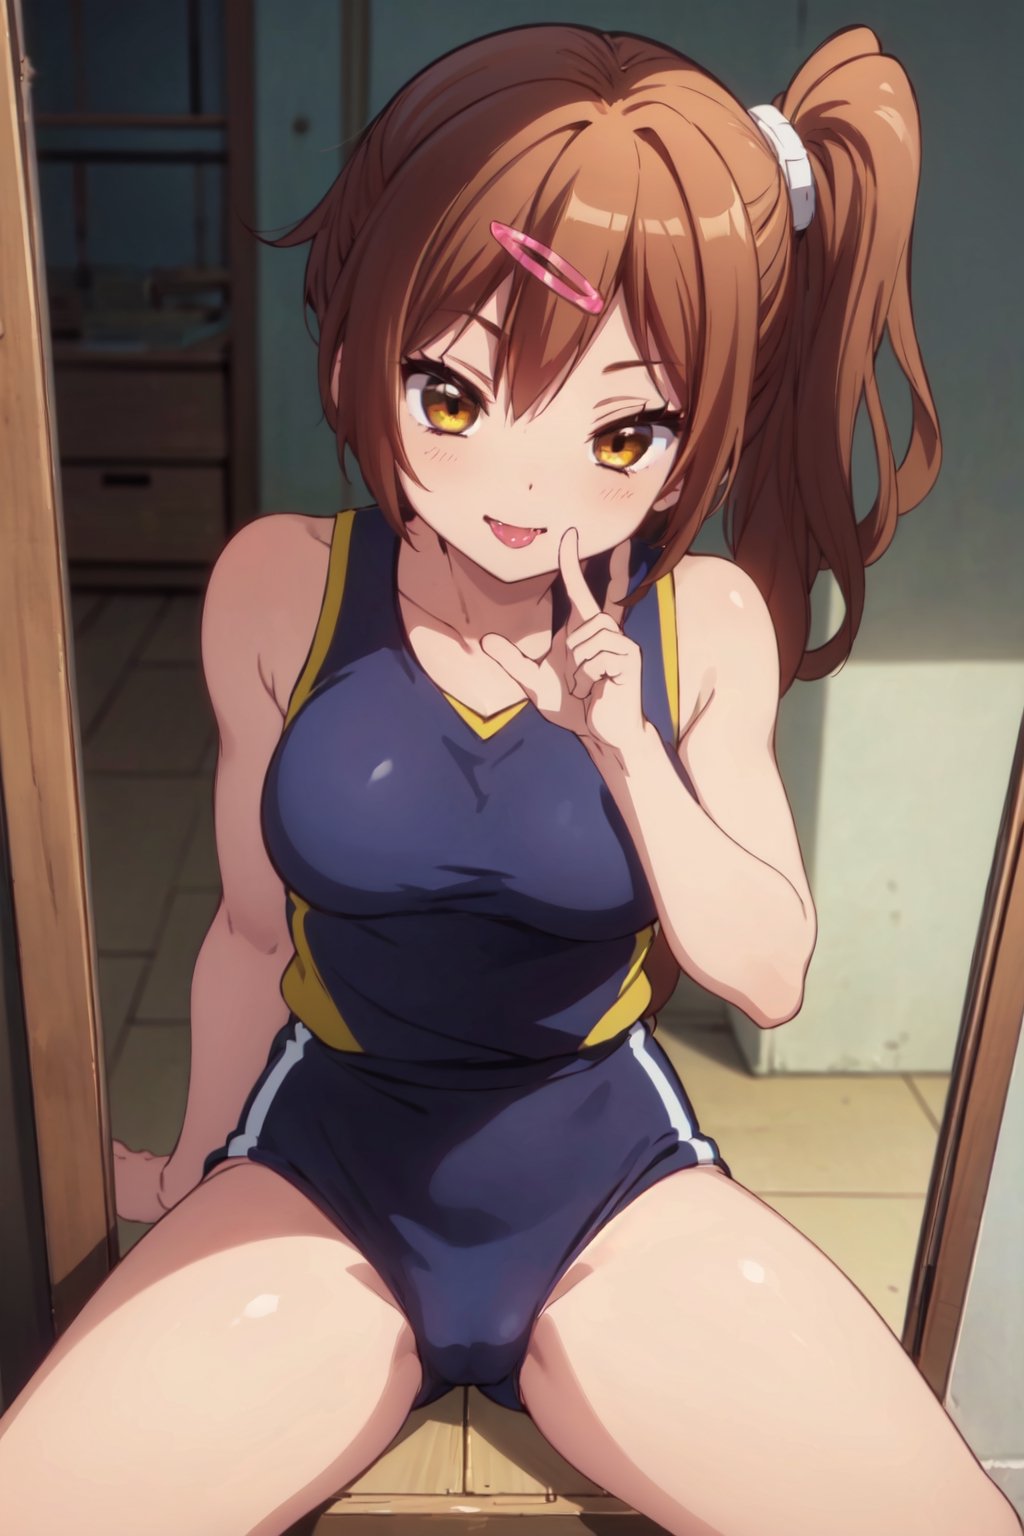 asterpeace, best quality, highres ,girl,solo,narrow_waist, thighs,perfect face,spread_legs,flirty,charming,perfect light.

boichi anime style.breasts,ayase aragaki, volleyball uniform,heavy_breathing,smile. from_above , side_ponytail,  mirror, smile, selfie with mobile, perfect eyes, seductive eyes, seductive smile, seductive pose, looking at the viewer, sexy poses',1 girl,se, Fellatio Gesture,saliva_trail ,boichi anime style